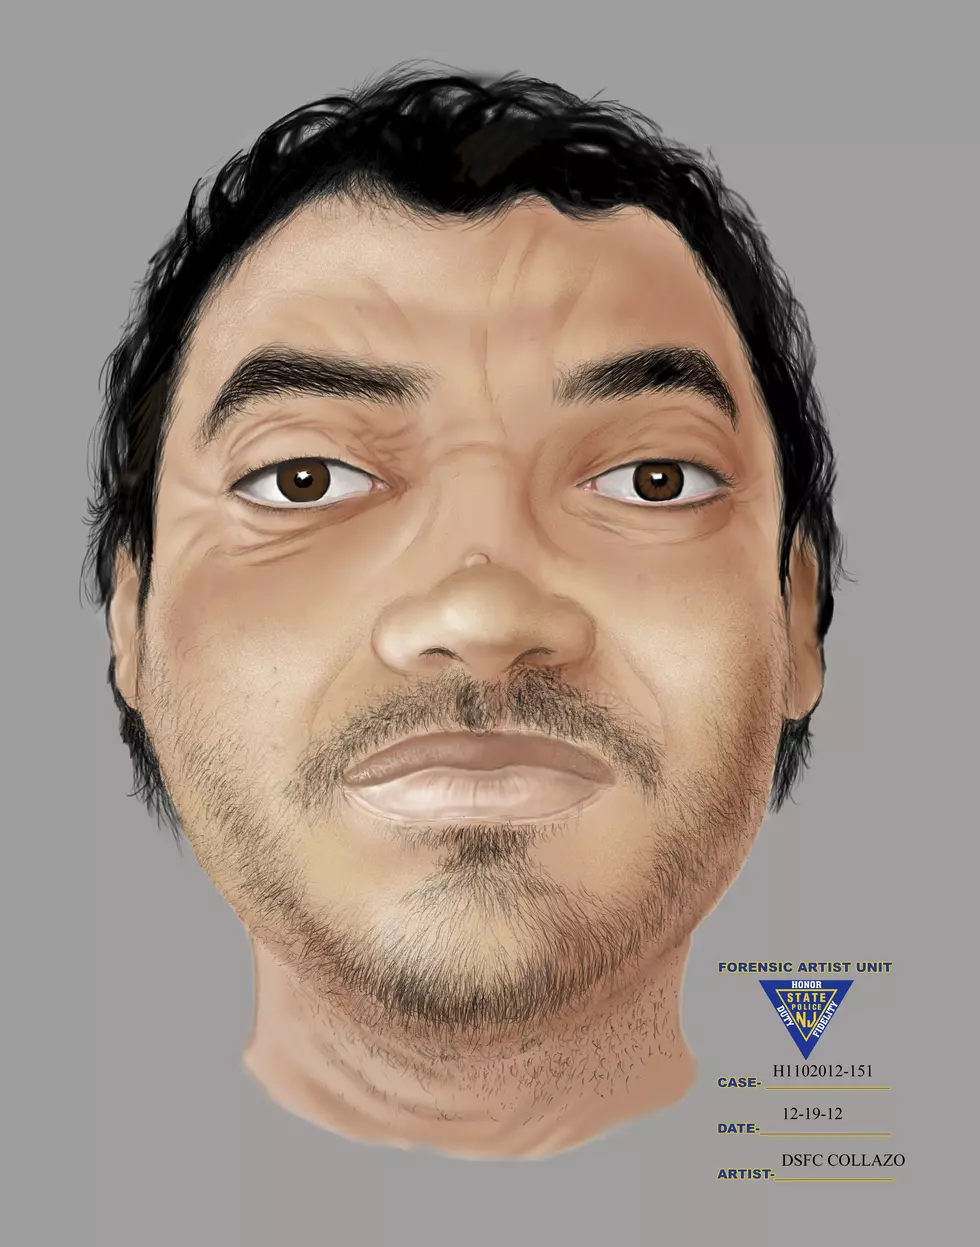 Do You Recognize Him? Dead Man&#8217;s Identity Still Unknown after 18 Months